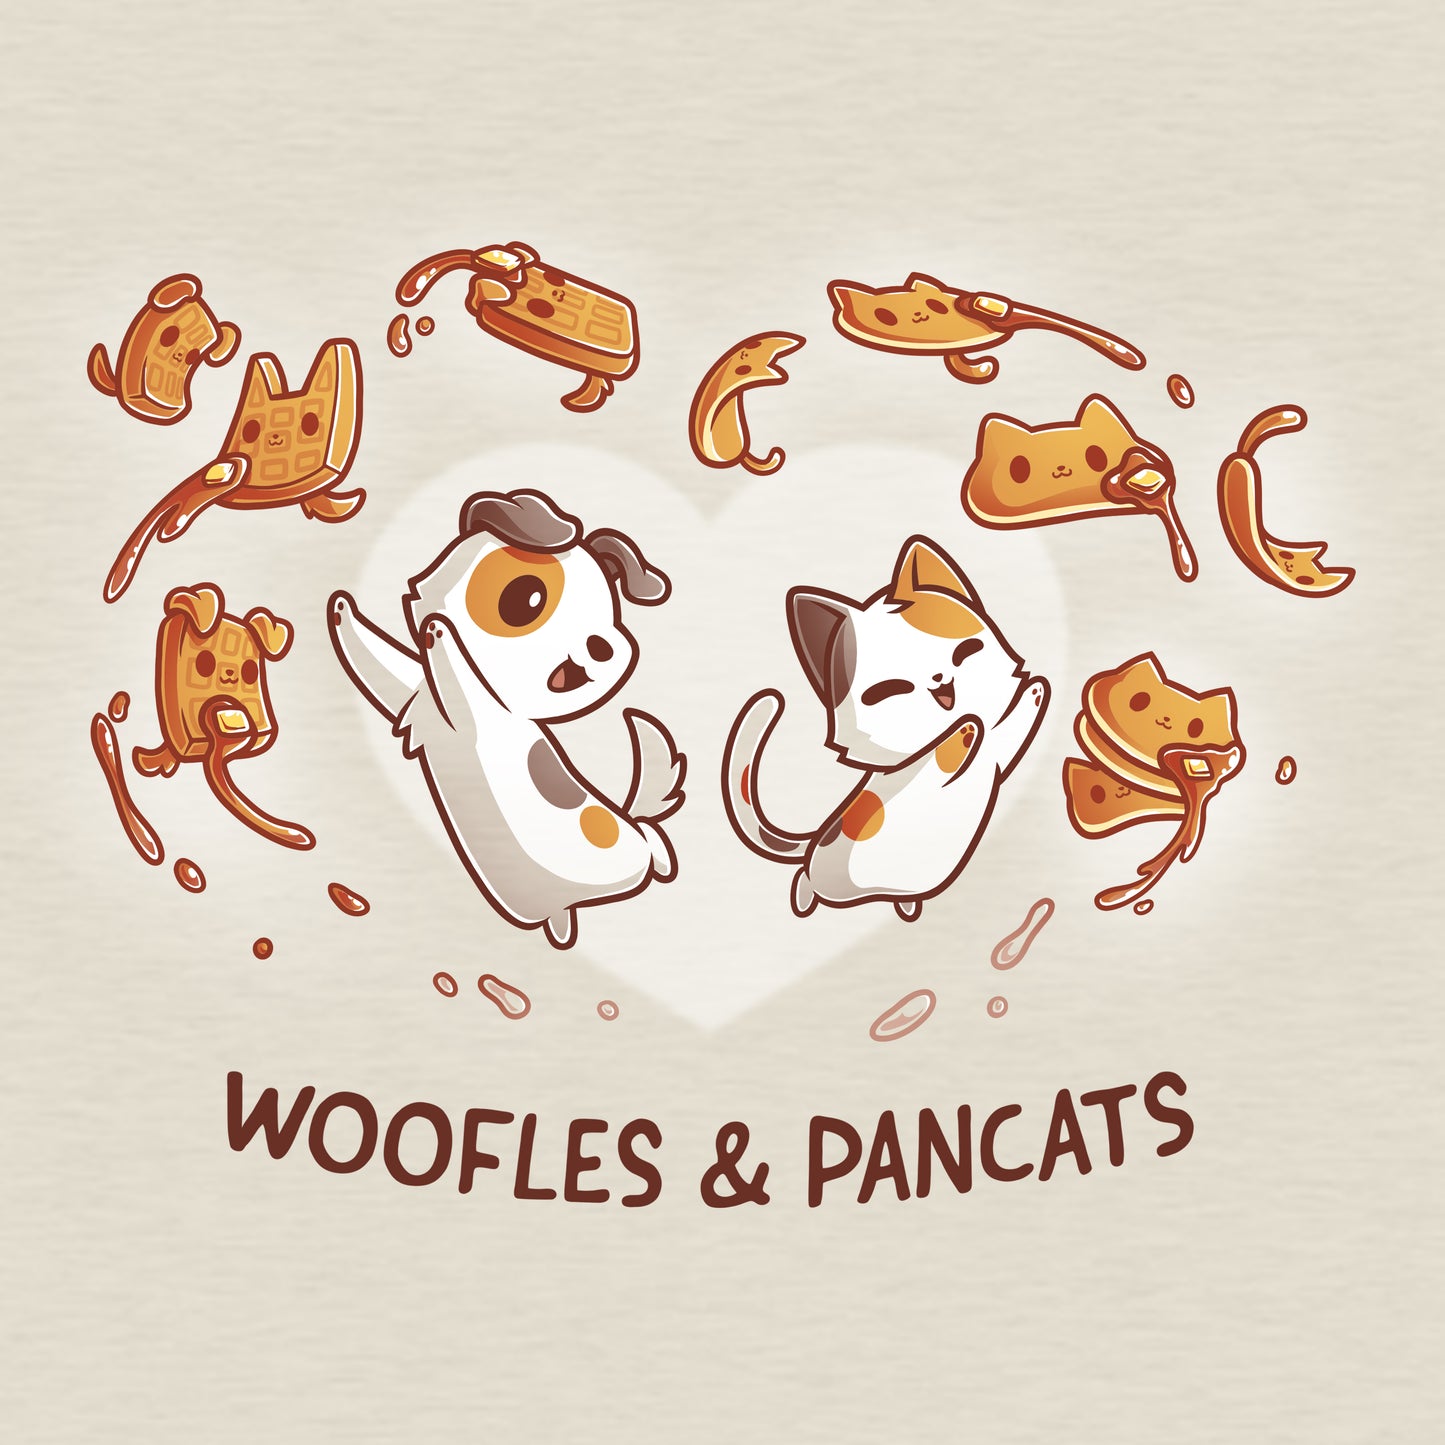 Super soft Woofles & Pancats natural heather T-Shirt by TeeTurtle.